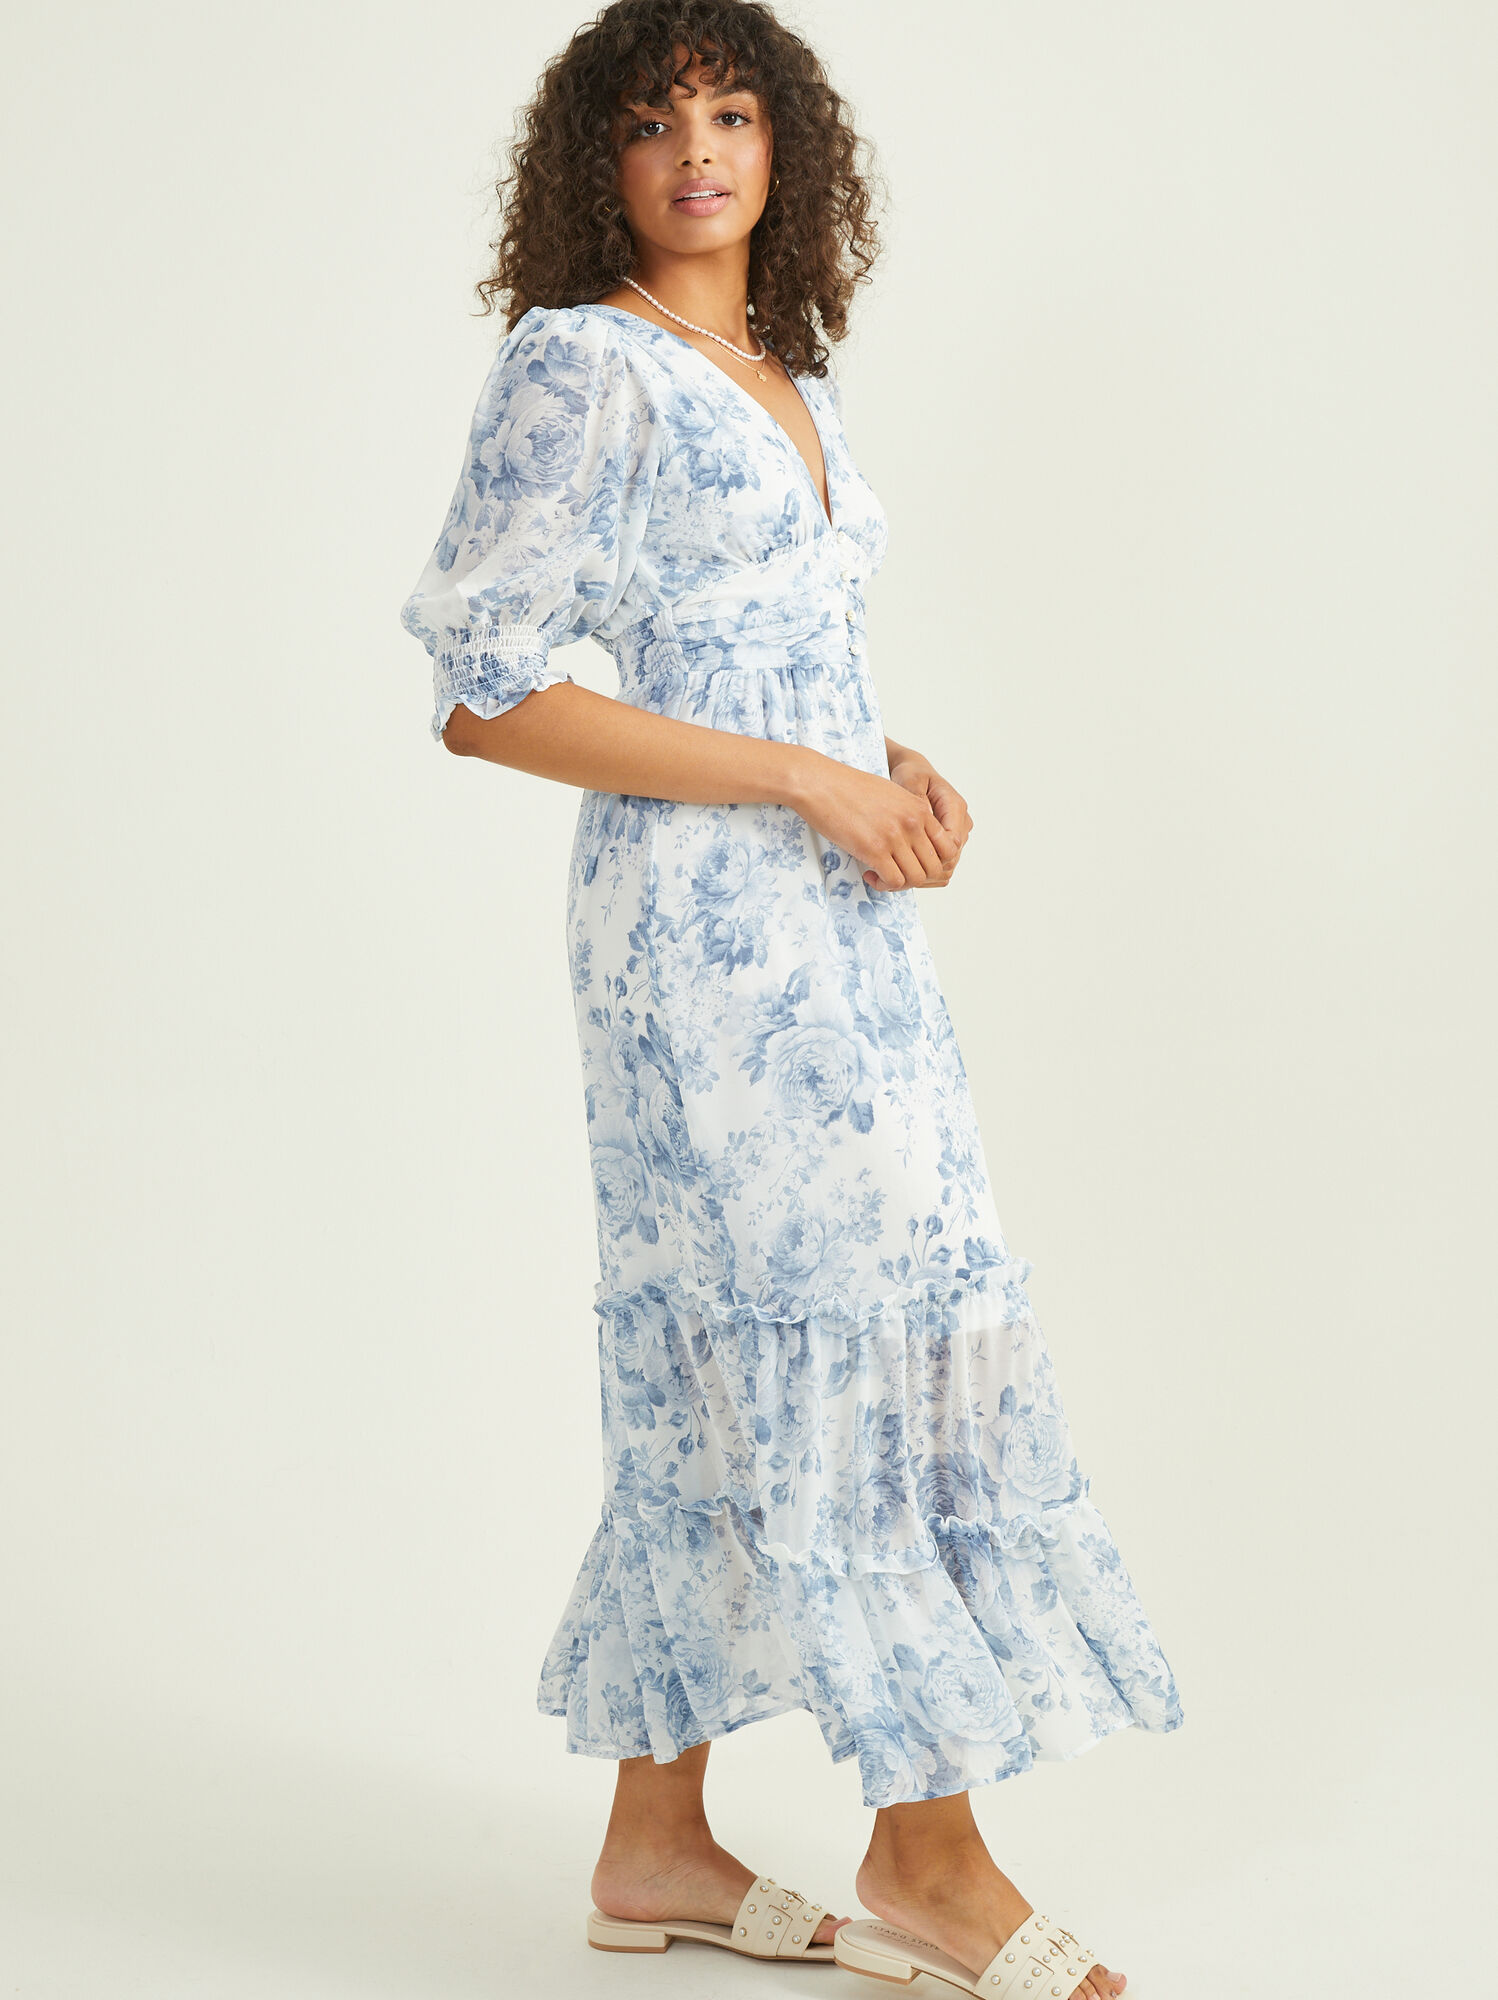 prediction Bald session Leo Floral Maxi Dress with Buttons in White & Blue | Altar'd State